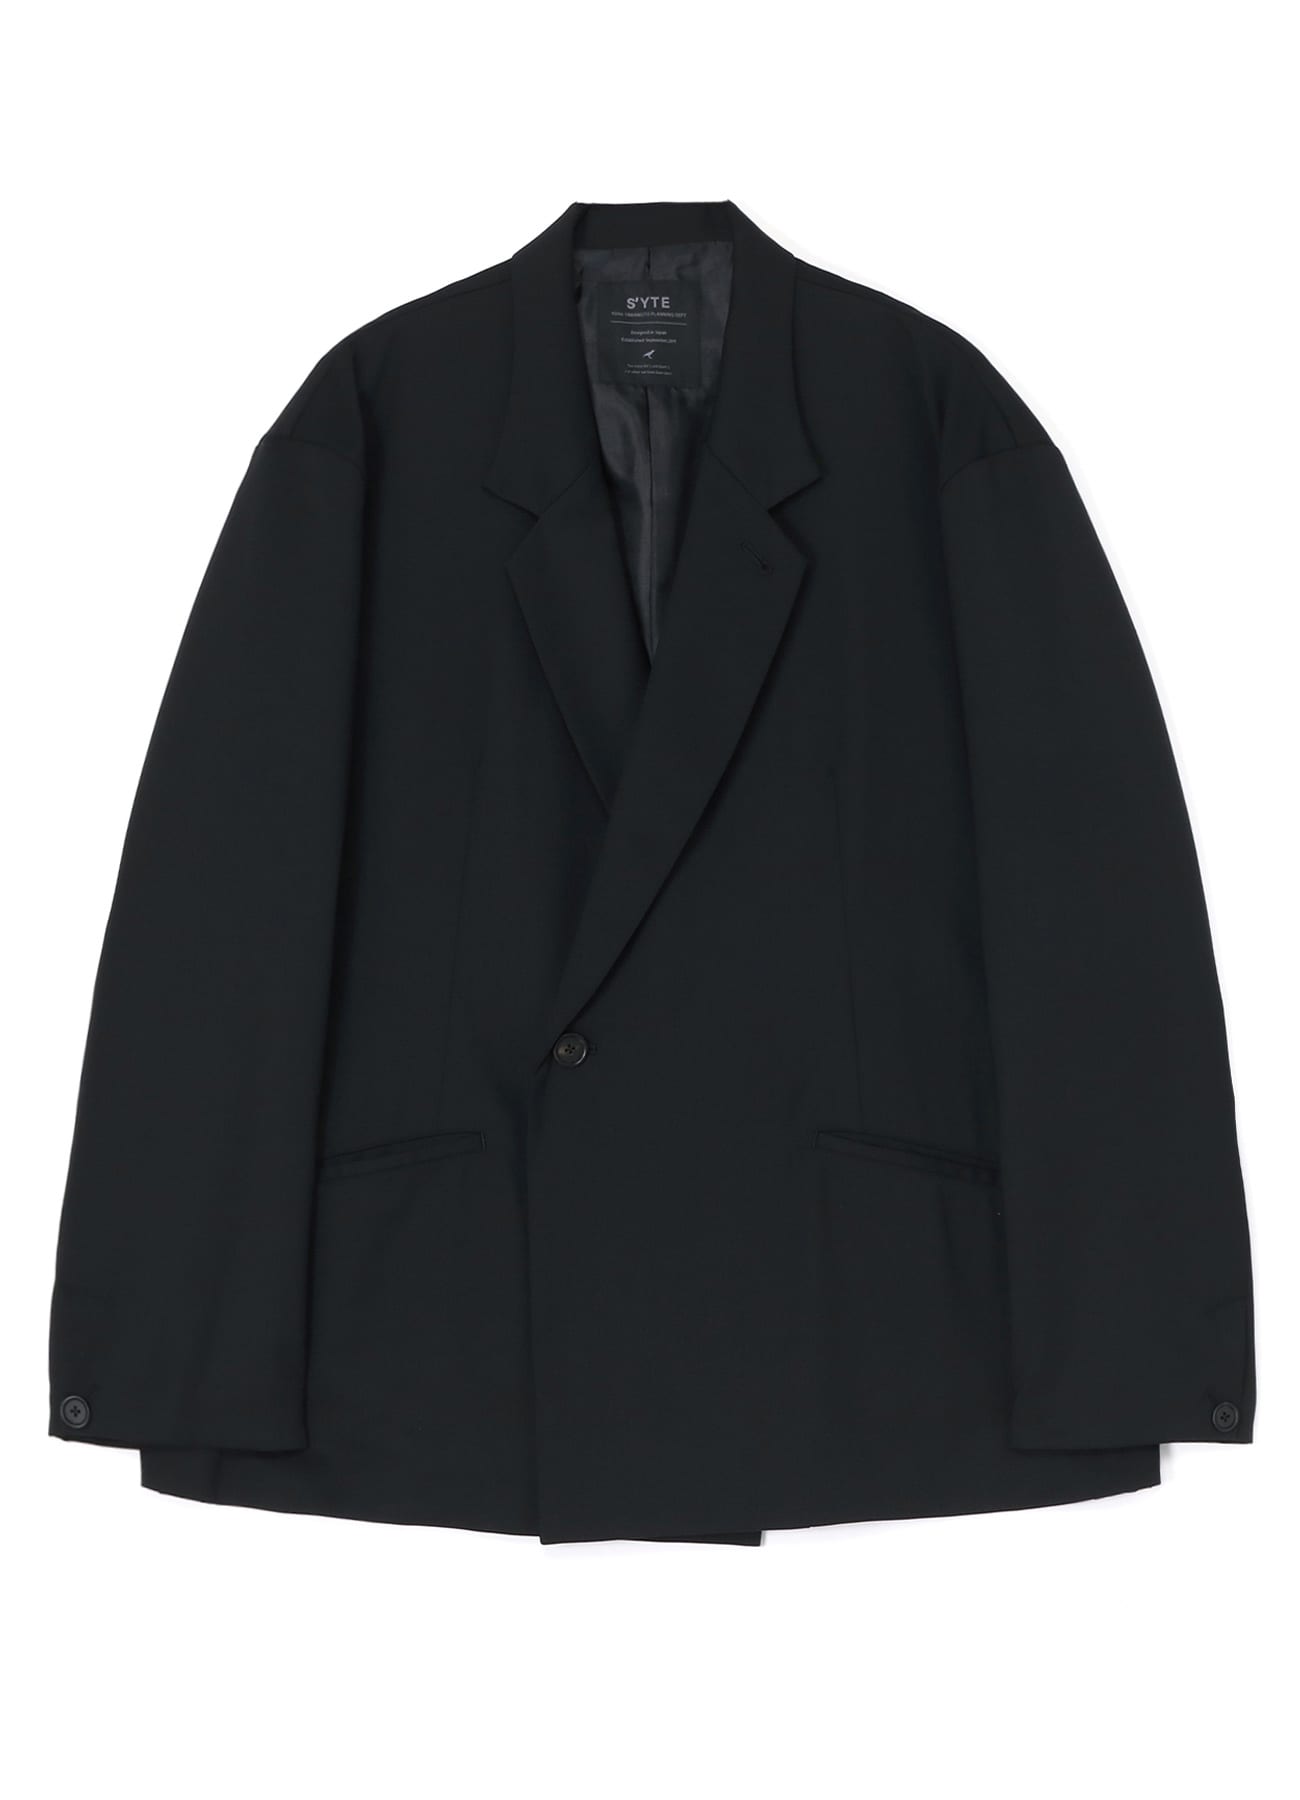 T/W GABARDINE DOUBLE-BREASTED JACKET WITH IRREGULAR BUTTONING(M 